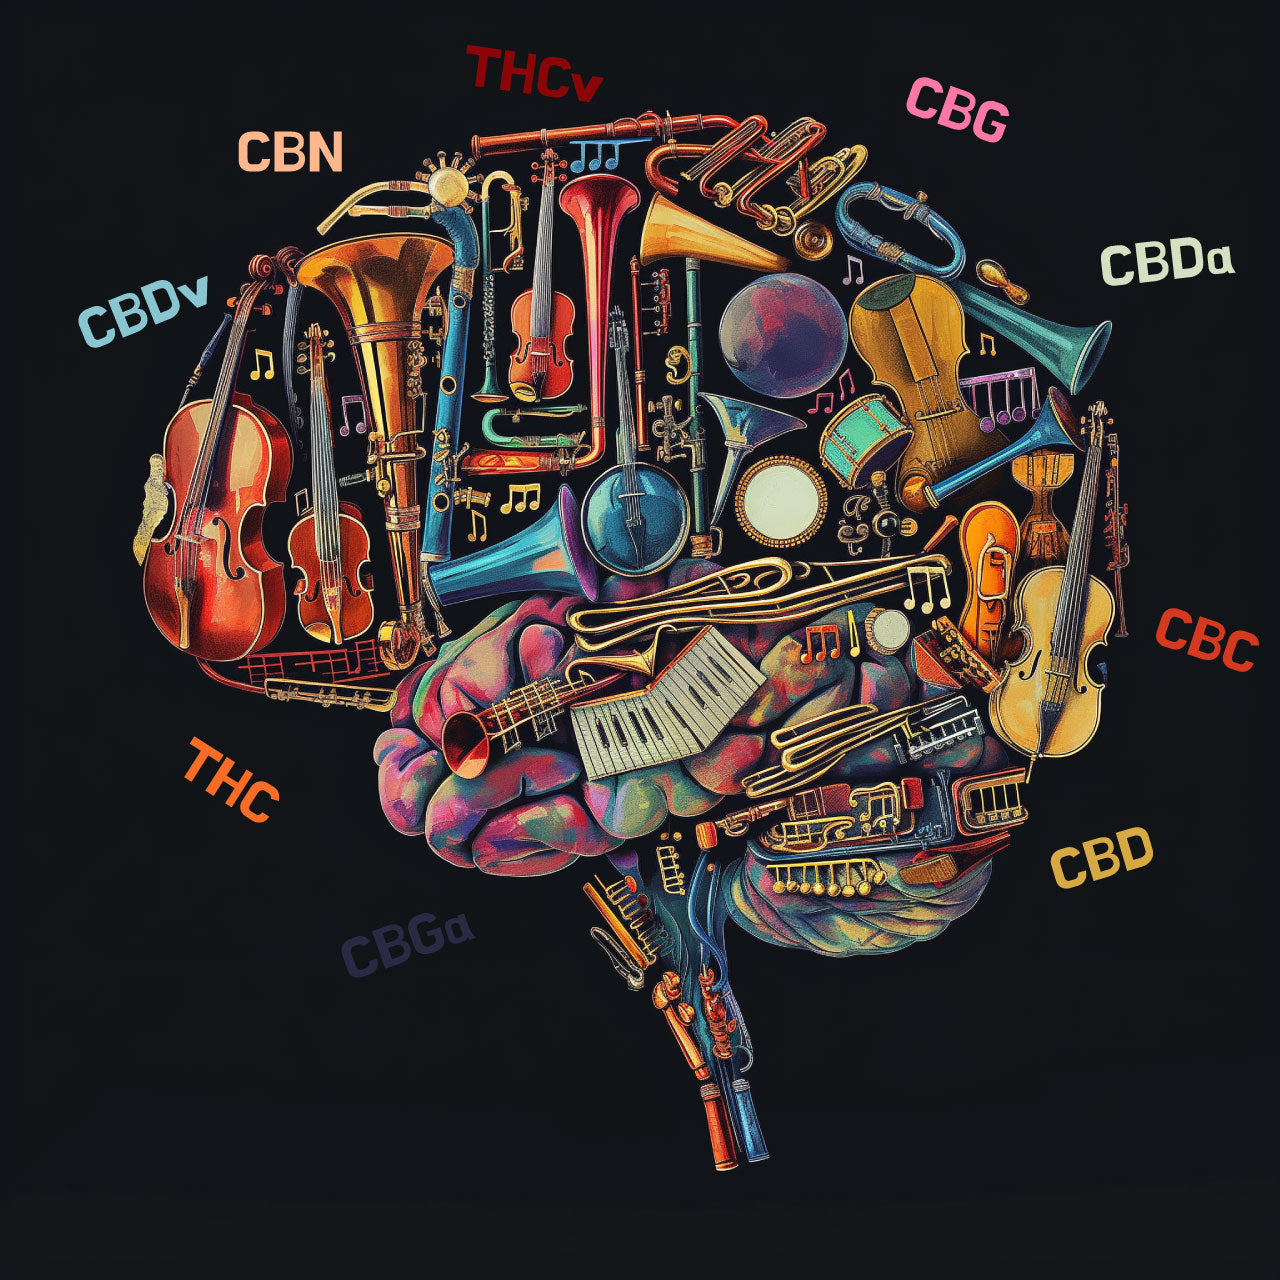 Image depicting the Entourage Effect featuring a brain composed of different musical instruments representing the variety of cannabinoids found in cannabis.